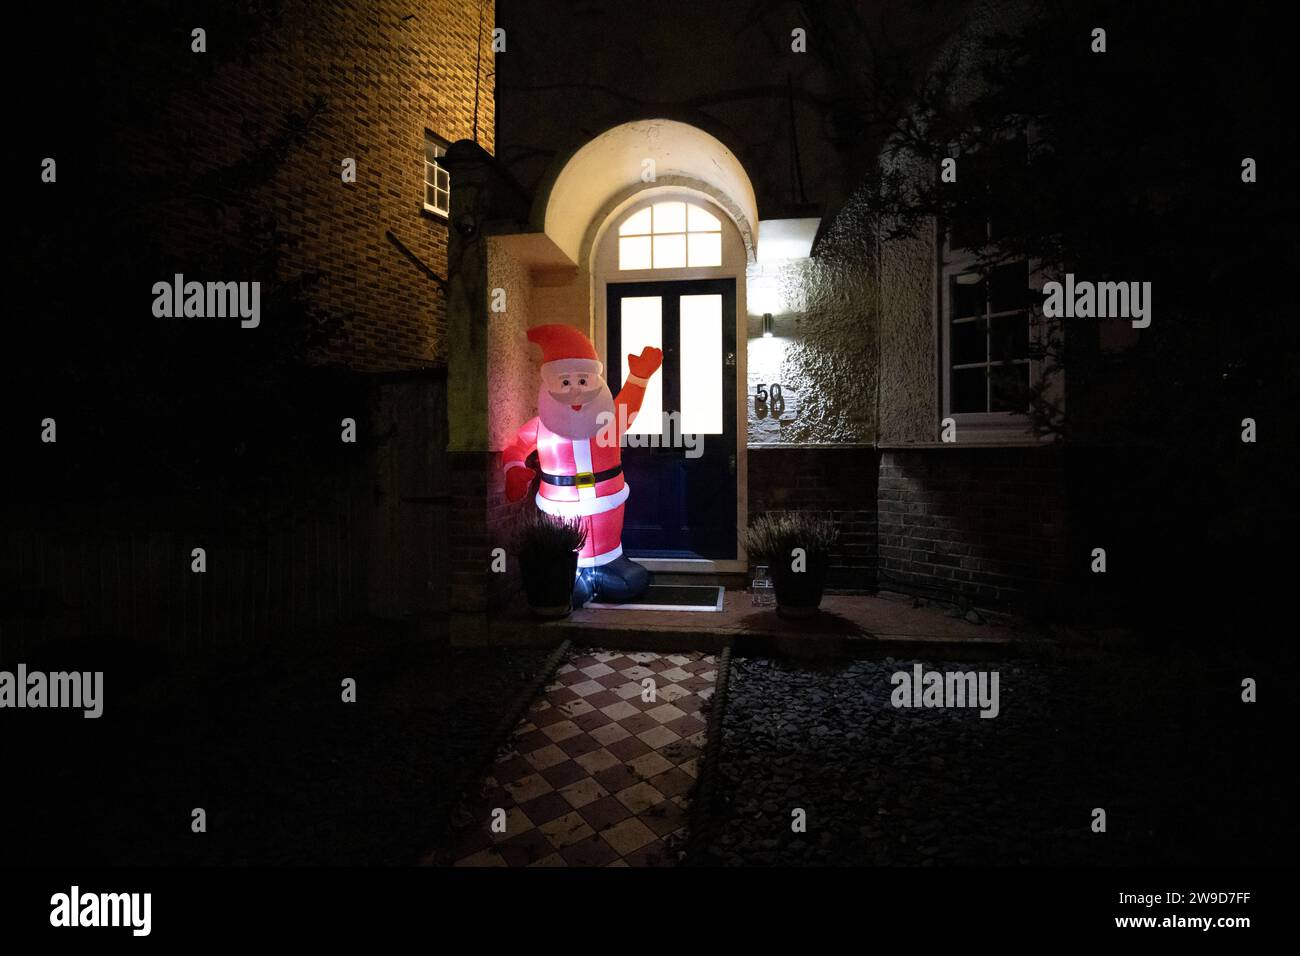 Residential house with inflatable Santa Clause ill united at the front doorway, London, England, United Kingdom Stock Photo